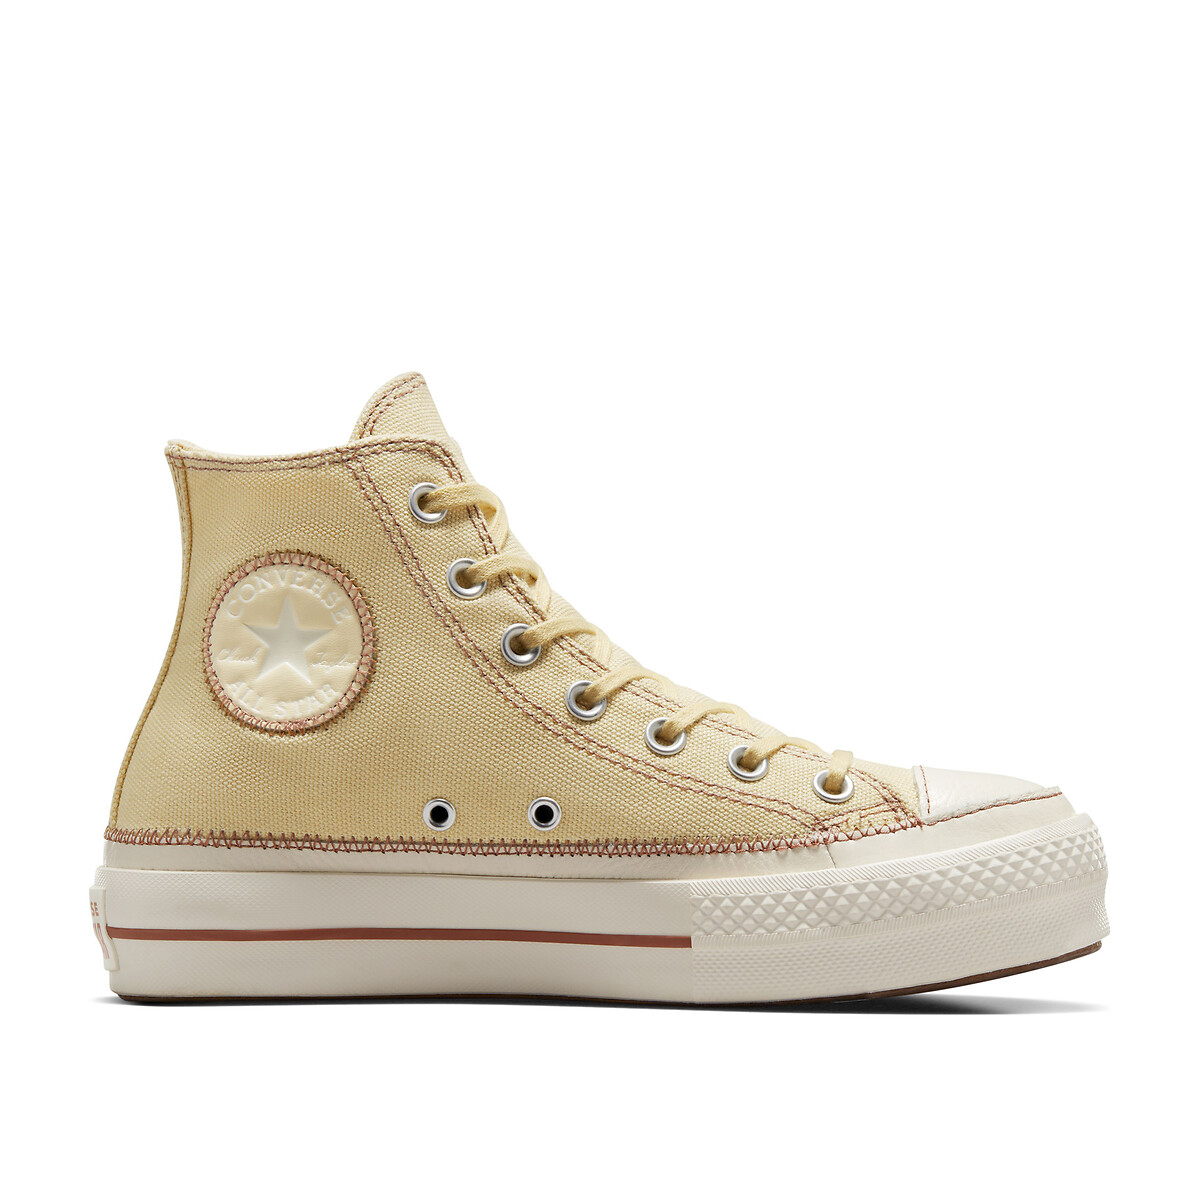 All Star Lift Hi Vintage Remastered Canvas High Top Trainers